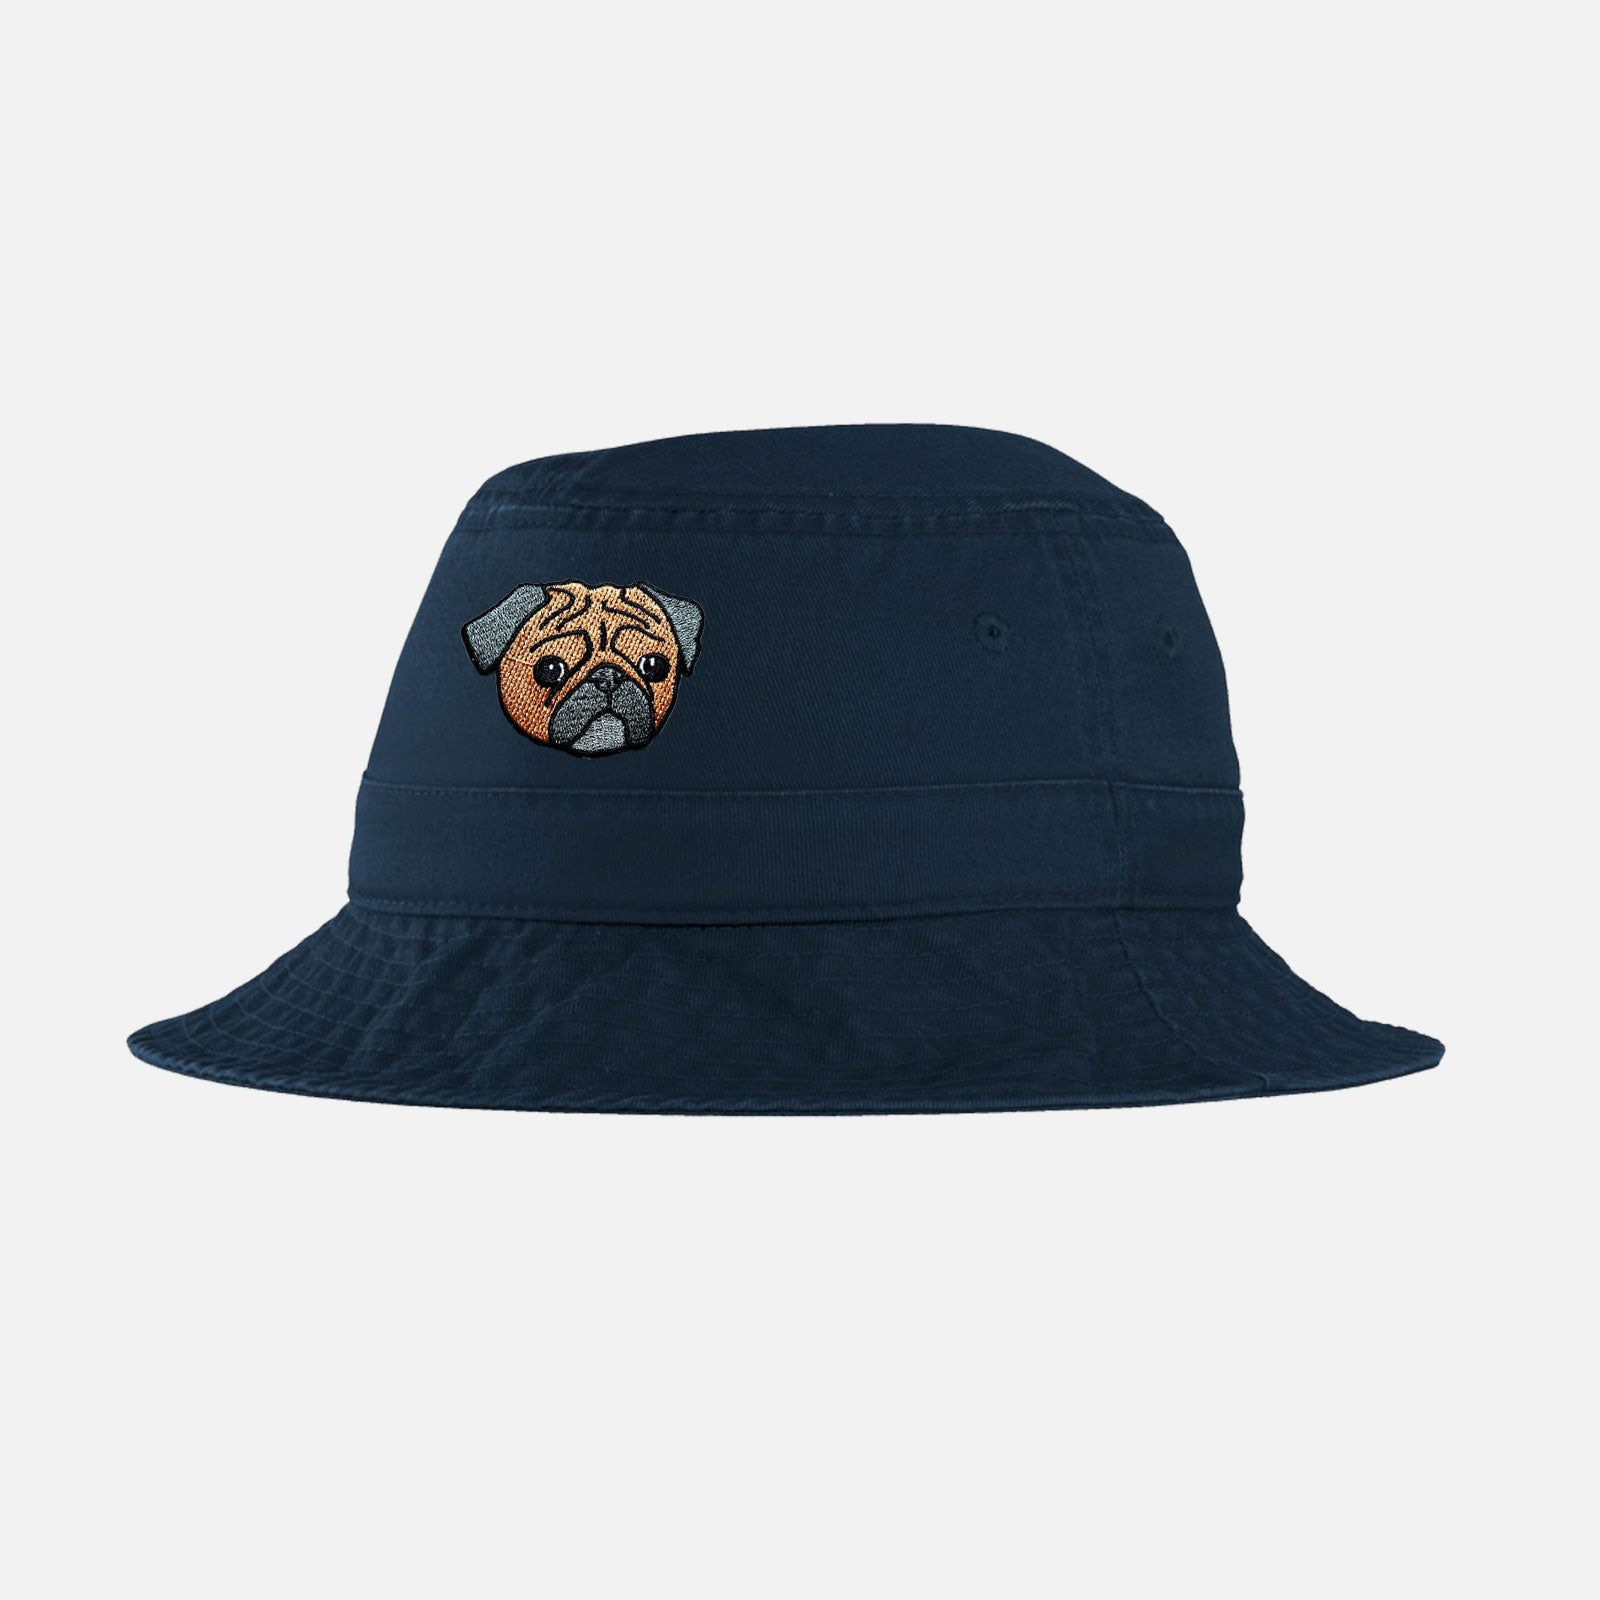 Navy custom bucket hat with your dog, cat or pet embroidered on it.